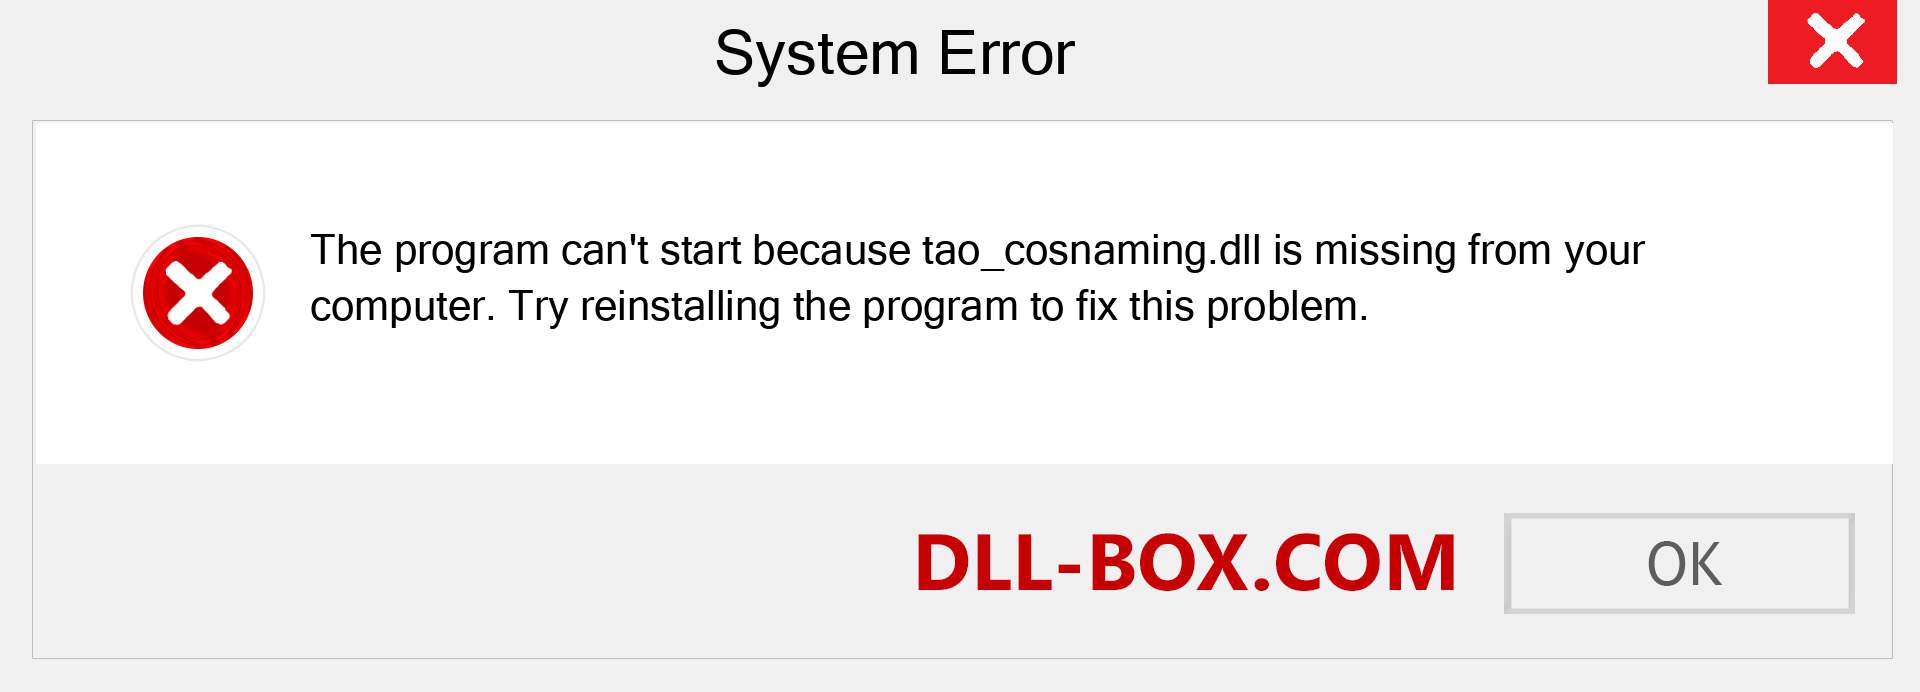  tao_cosnaming.dll file is missing?. Download for Windows 7, 8, 10 - Fix  tao_cosnaming dll Missing Error on Windows, photos, images